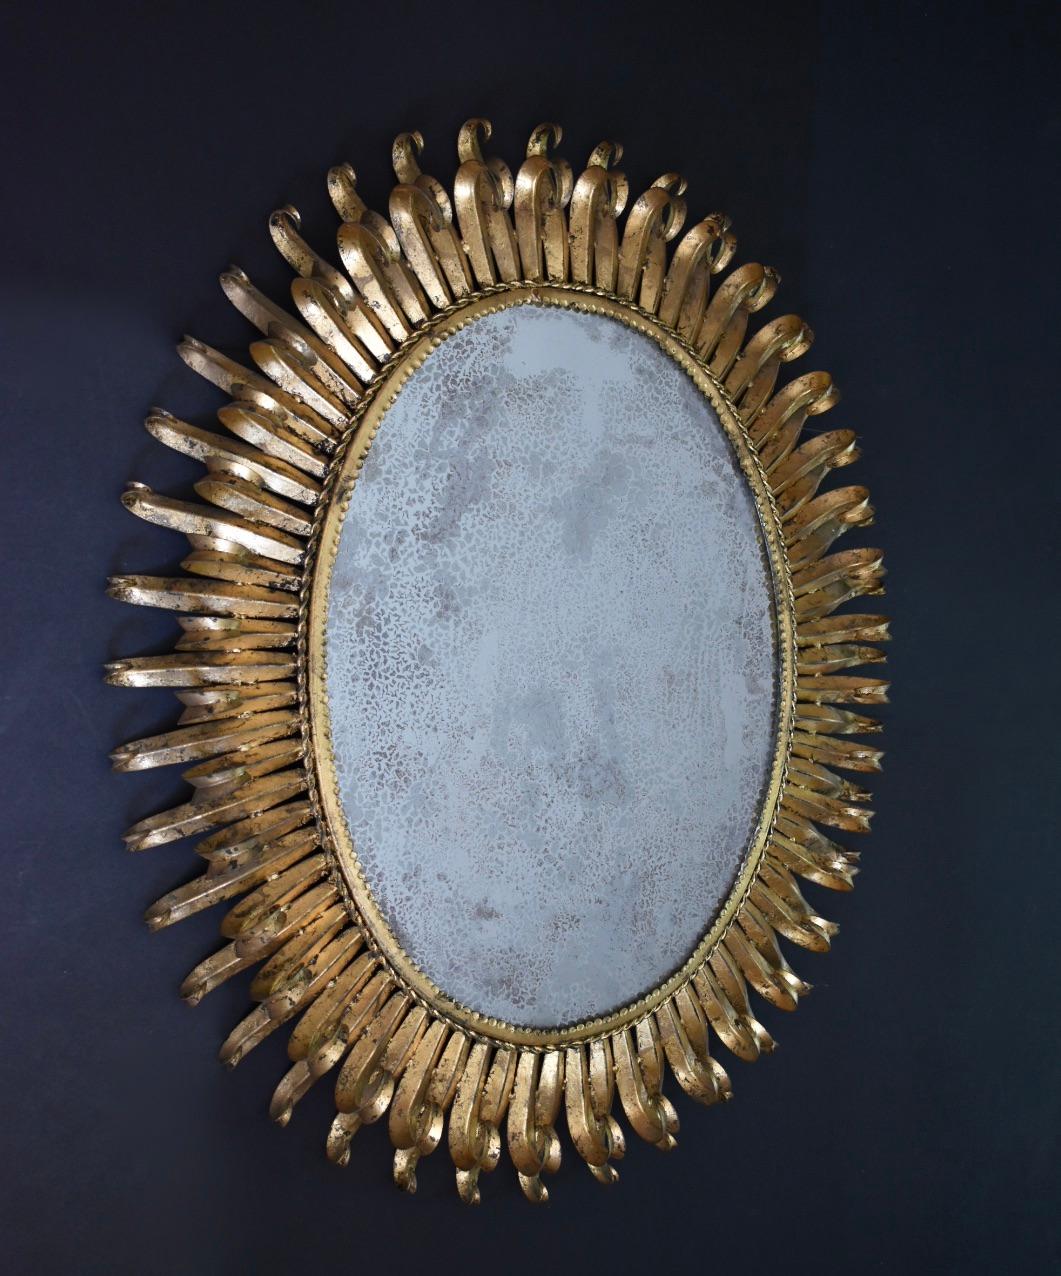 Large size oval soleil or sunburst wall mirror in original gilt iron finish with two rows of alternating long and short eyelash rays. Mirrored glass has heavy antiquing to the silvered backing. Single steel loop at back allows for vertical hanging.